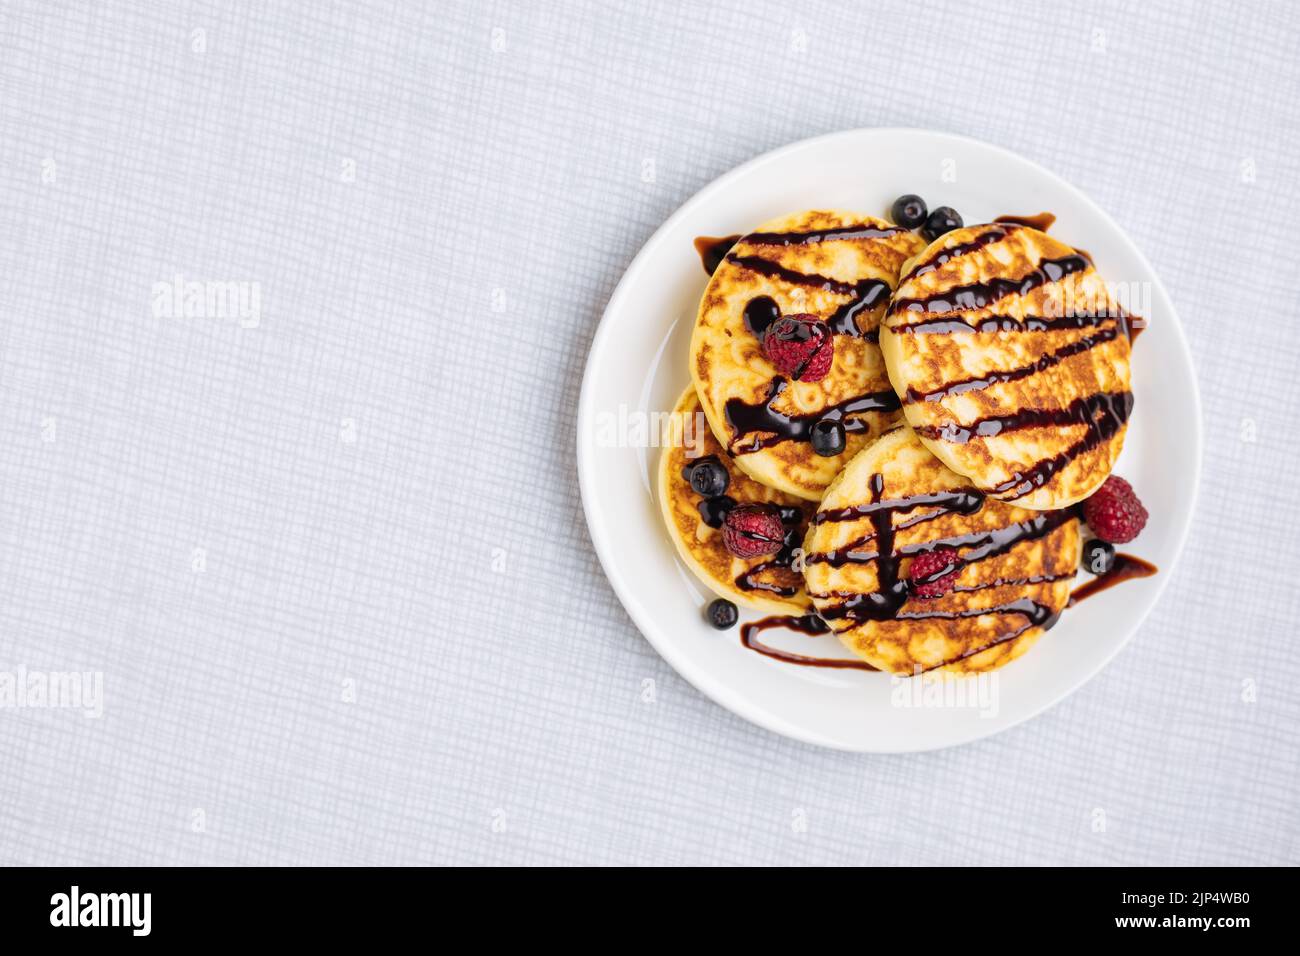 American pancakes decorated like smile and happy faces with raspberries, blueberries and banana. Food for kids, playful and creative. Top view. Stock Photo